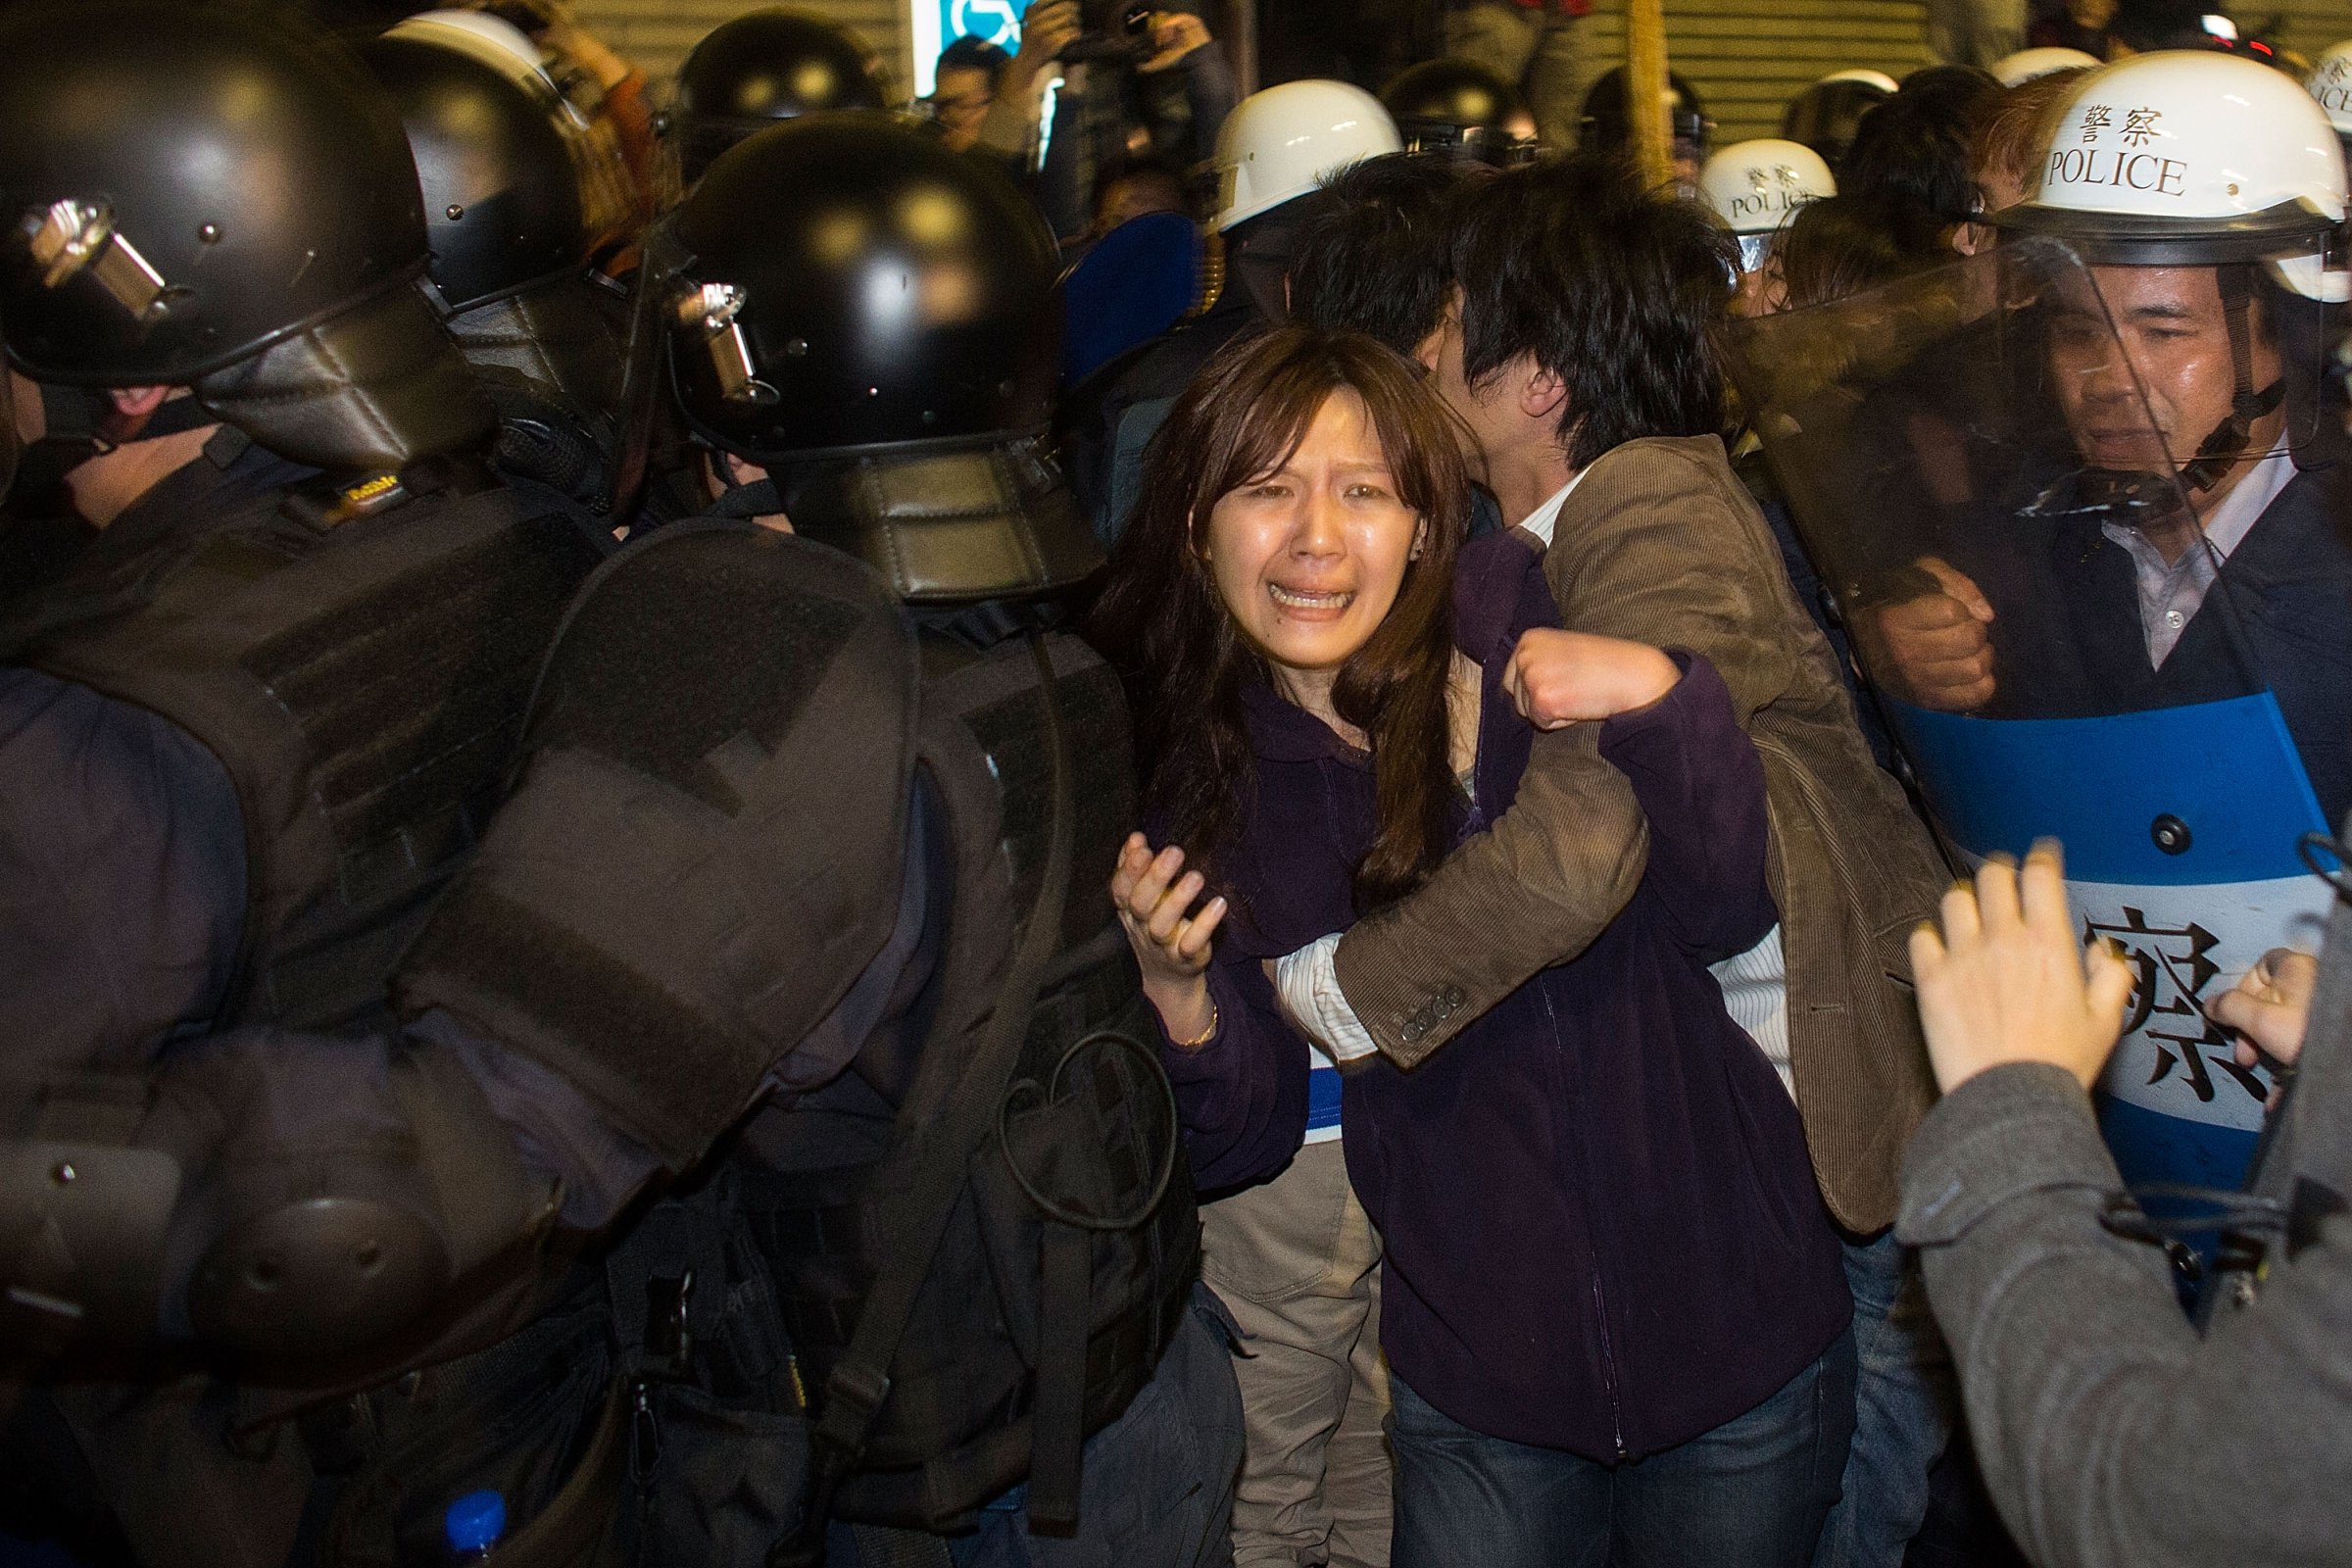 Riot police clash with student protesters outside Taiwan's cabinet offices in Taipei on March 24, 2014. Clashes erupted after Taiwan's President refused to scrap a contentious trade agreement with China and denounced the "illegal" occupation of government buildings by students opposed to its ratification